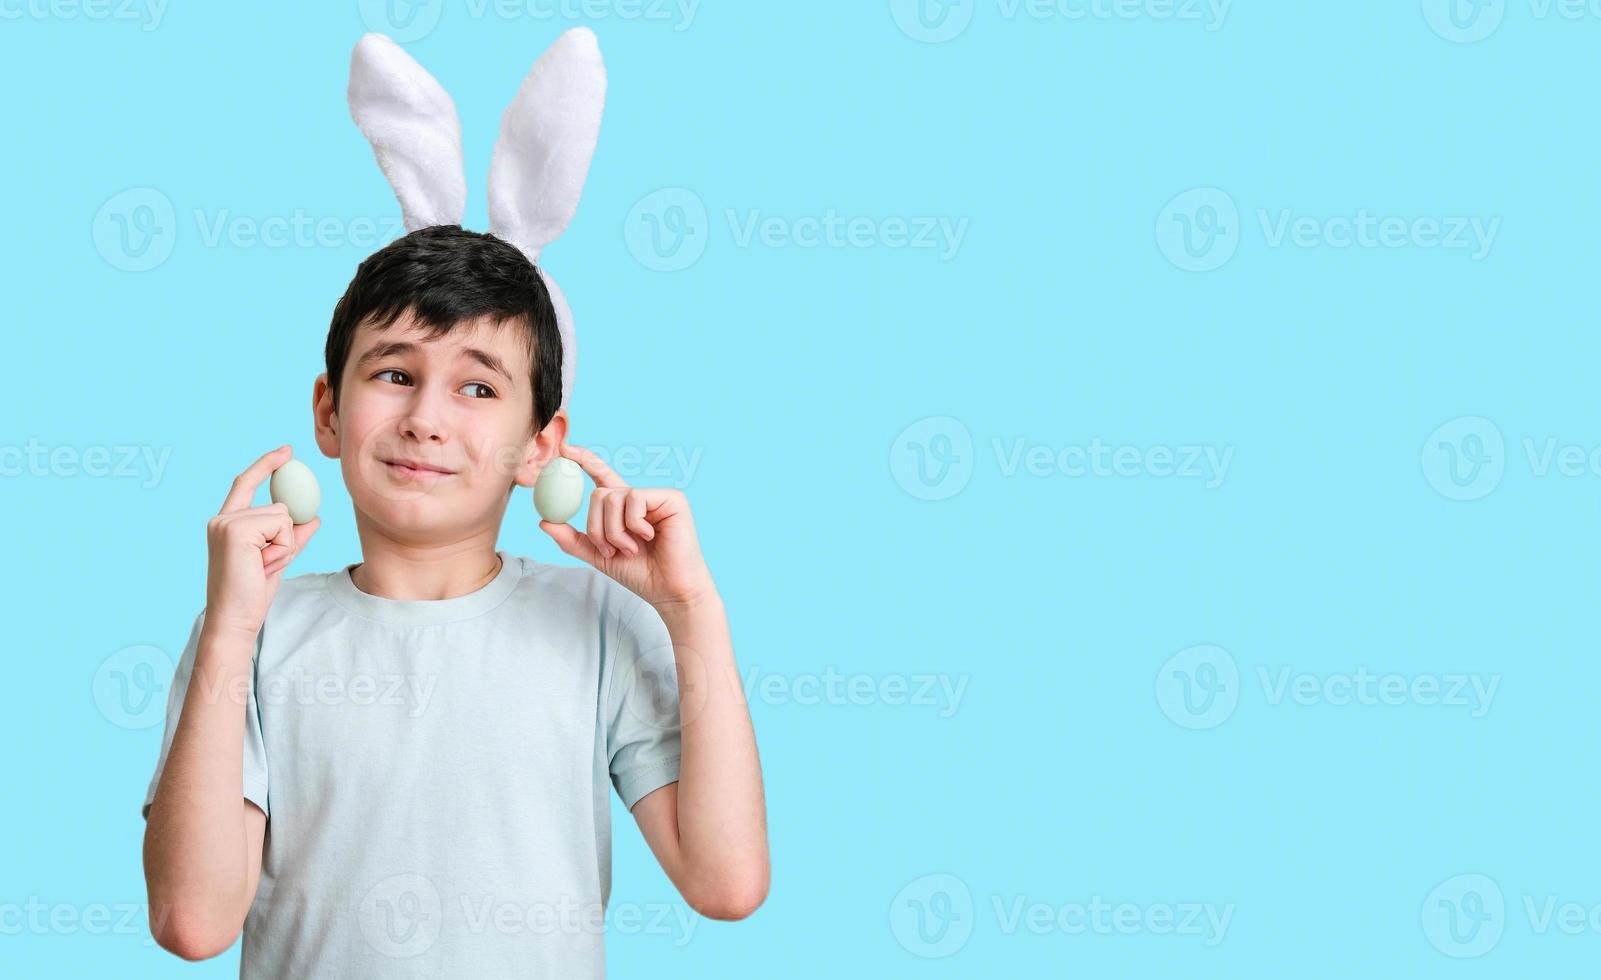 Smiling boy wearing bunny ears holding Easter eggs on a blue background with space for text. Easter banner photo